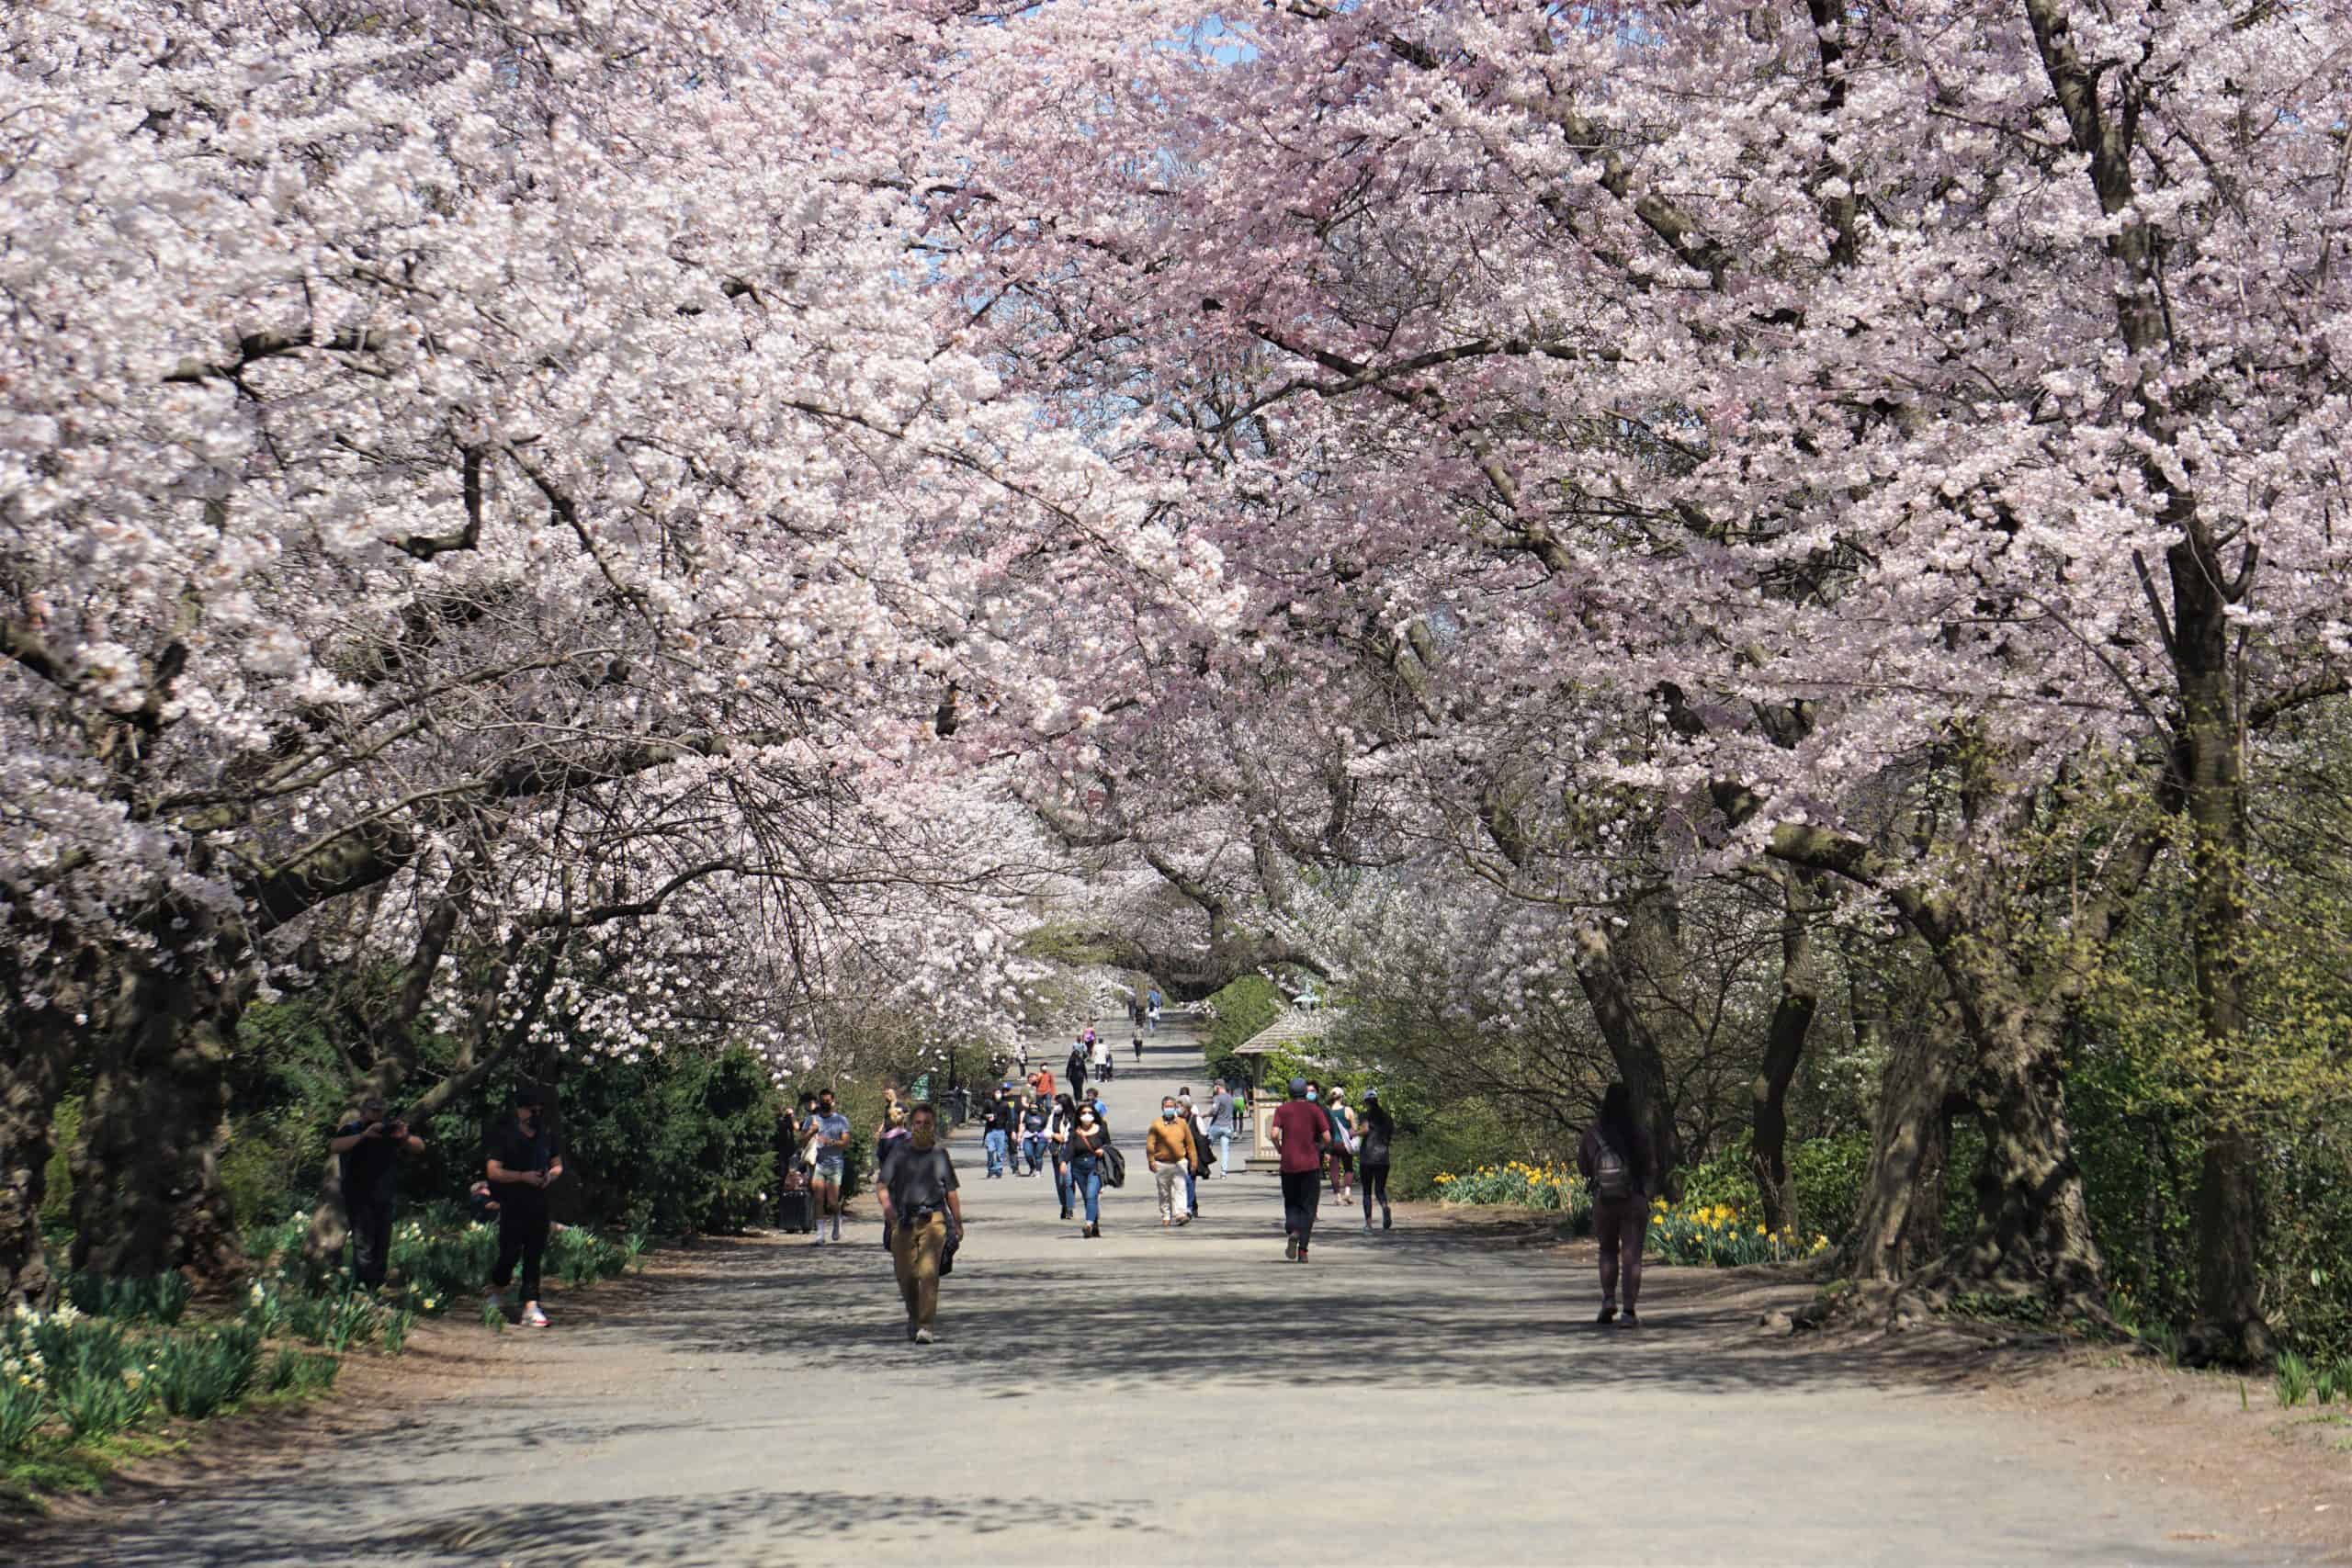 Where to See Cherry Blossoms in Central Park